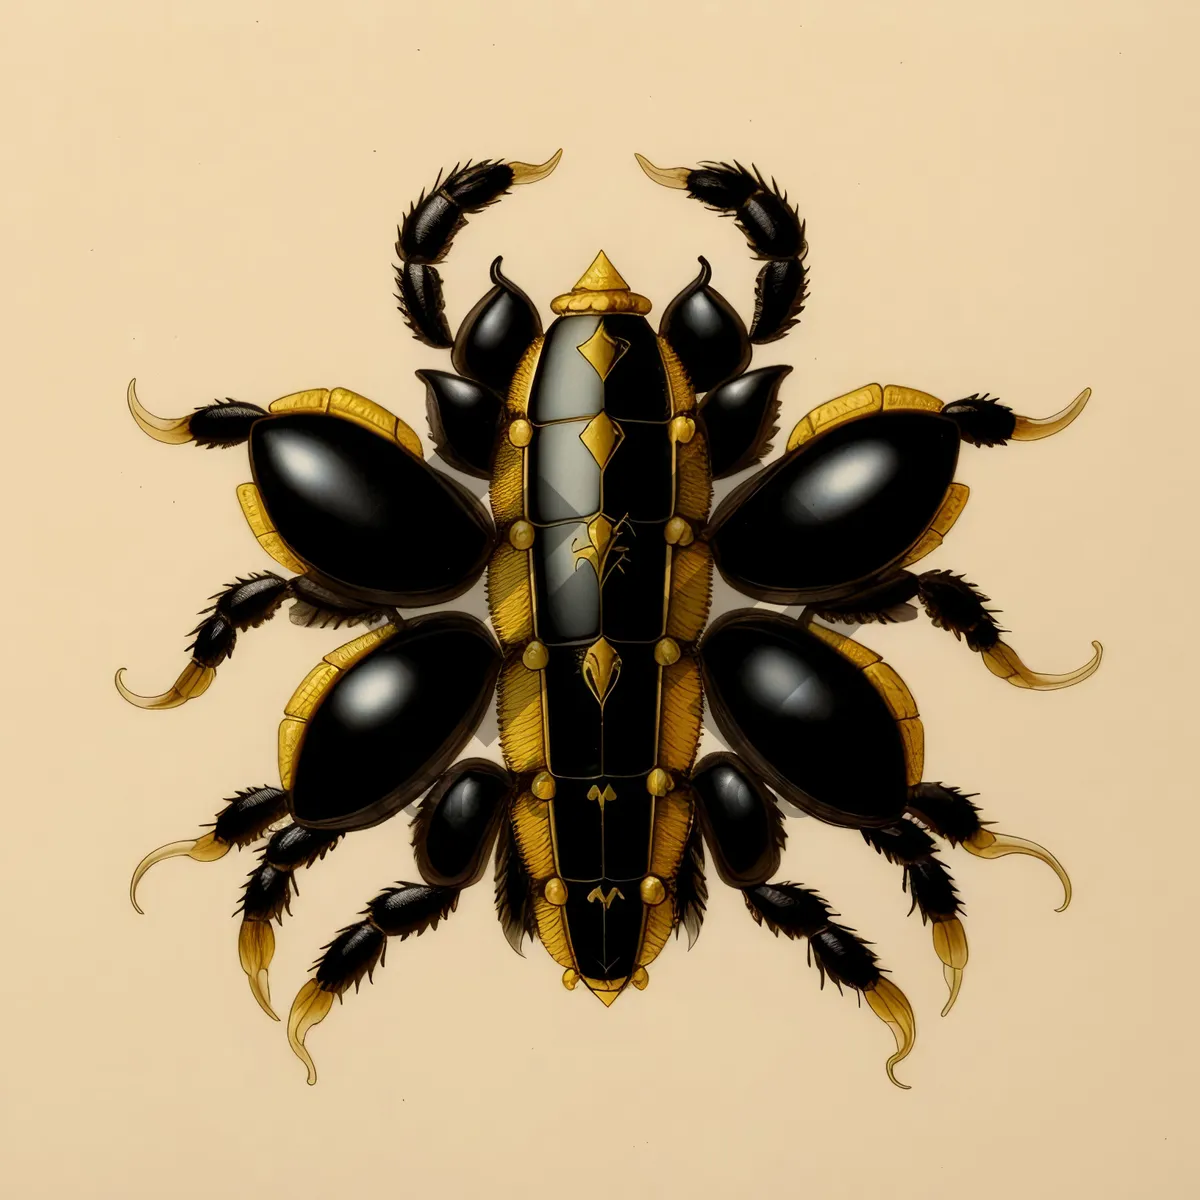 Picture of Retro Art: Louse on Decorative Leaf